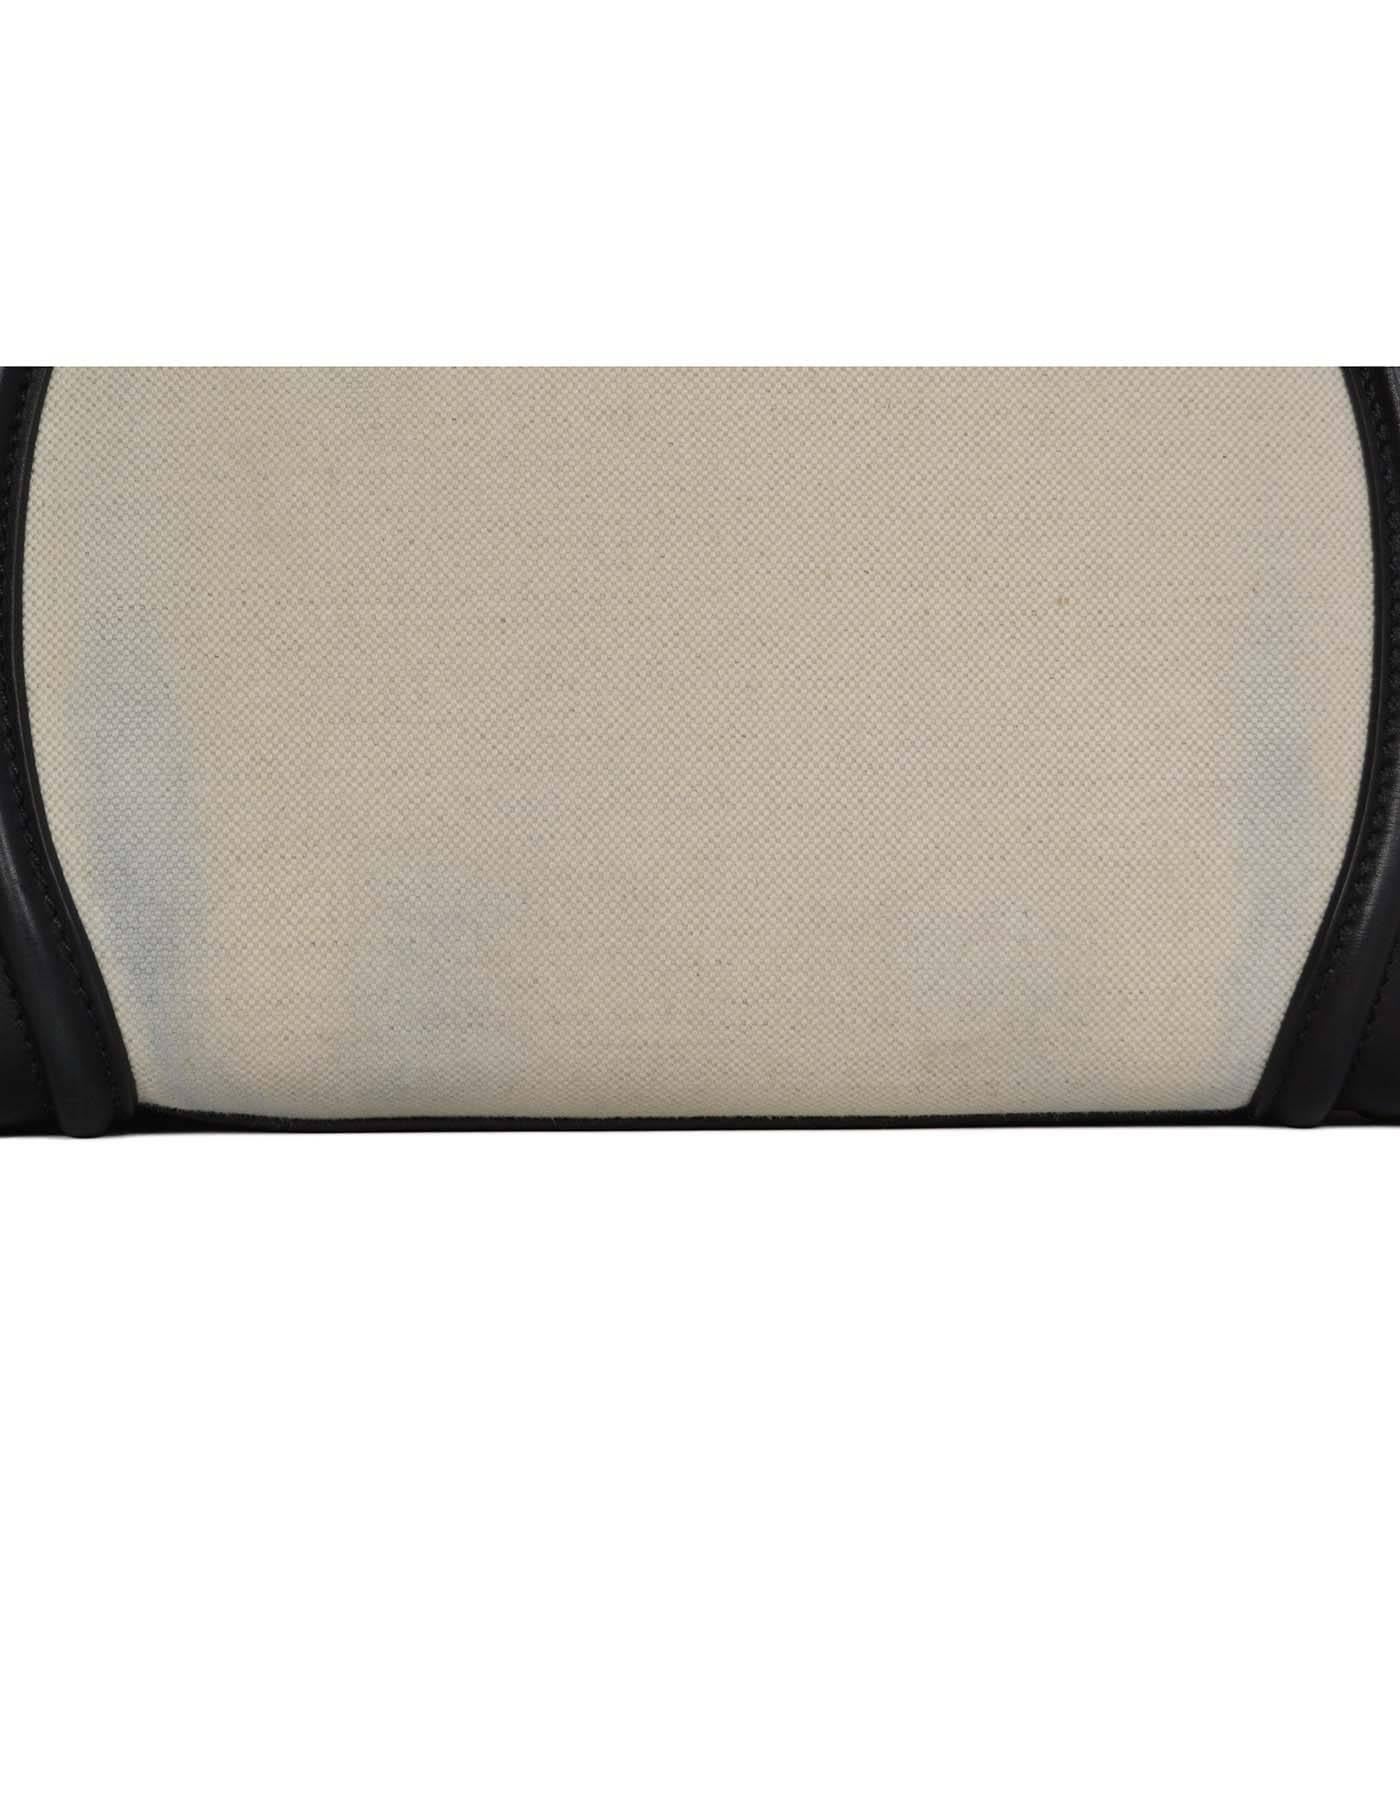 Celine Ivory & Black Canvas/Leather Mini Luggage Tote Bag GHW In Excellent Condition In New York, NY